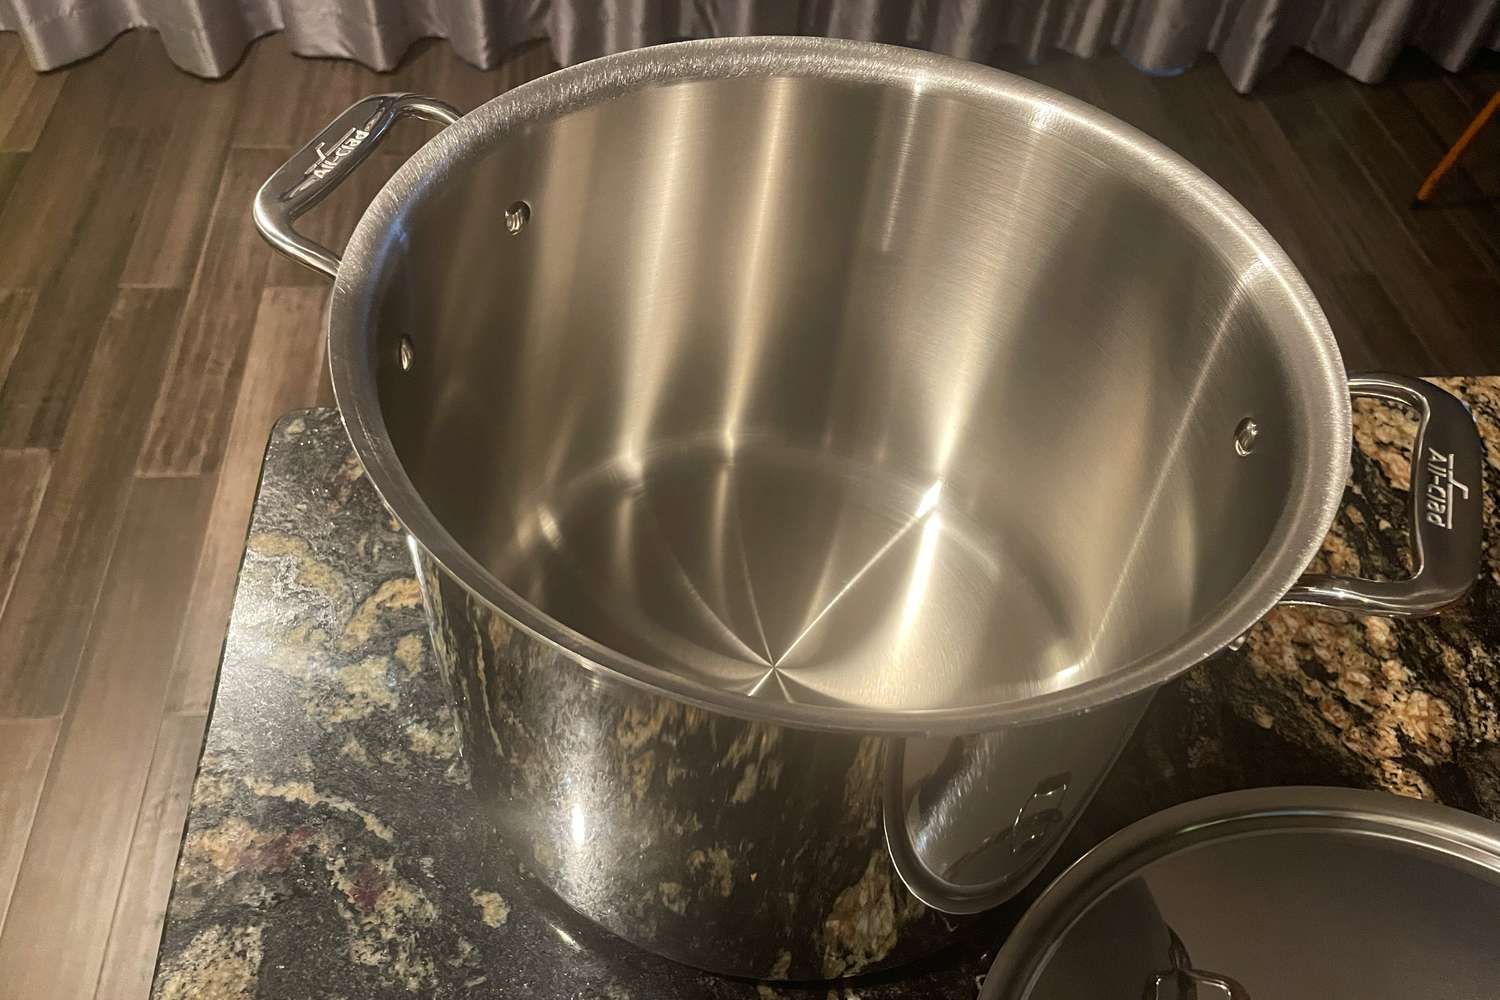 Empty All-Clad D3 12-quart stockpot on a dark marble counter